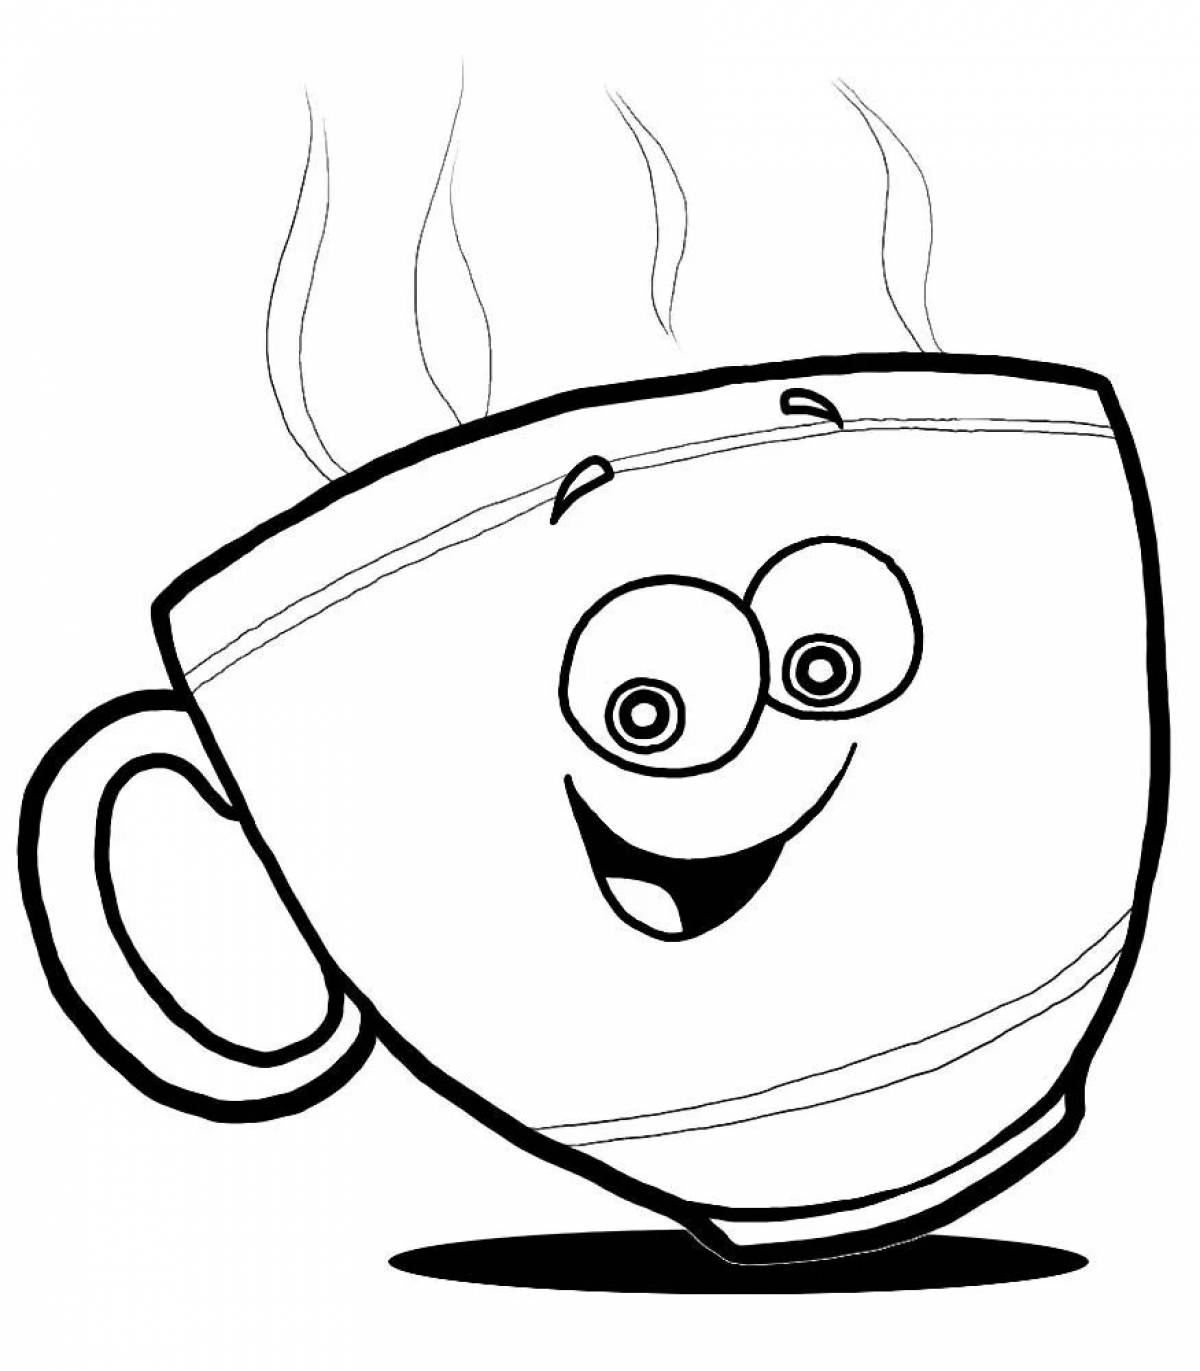 Sweet tea cup coloring page for kids